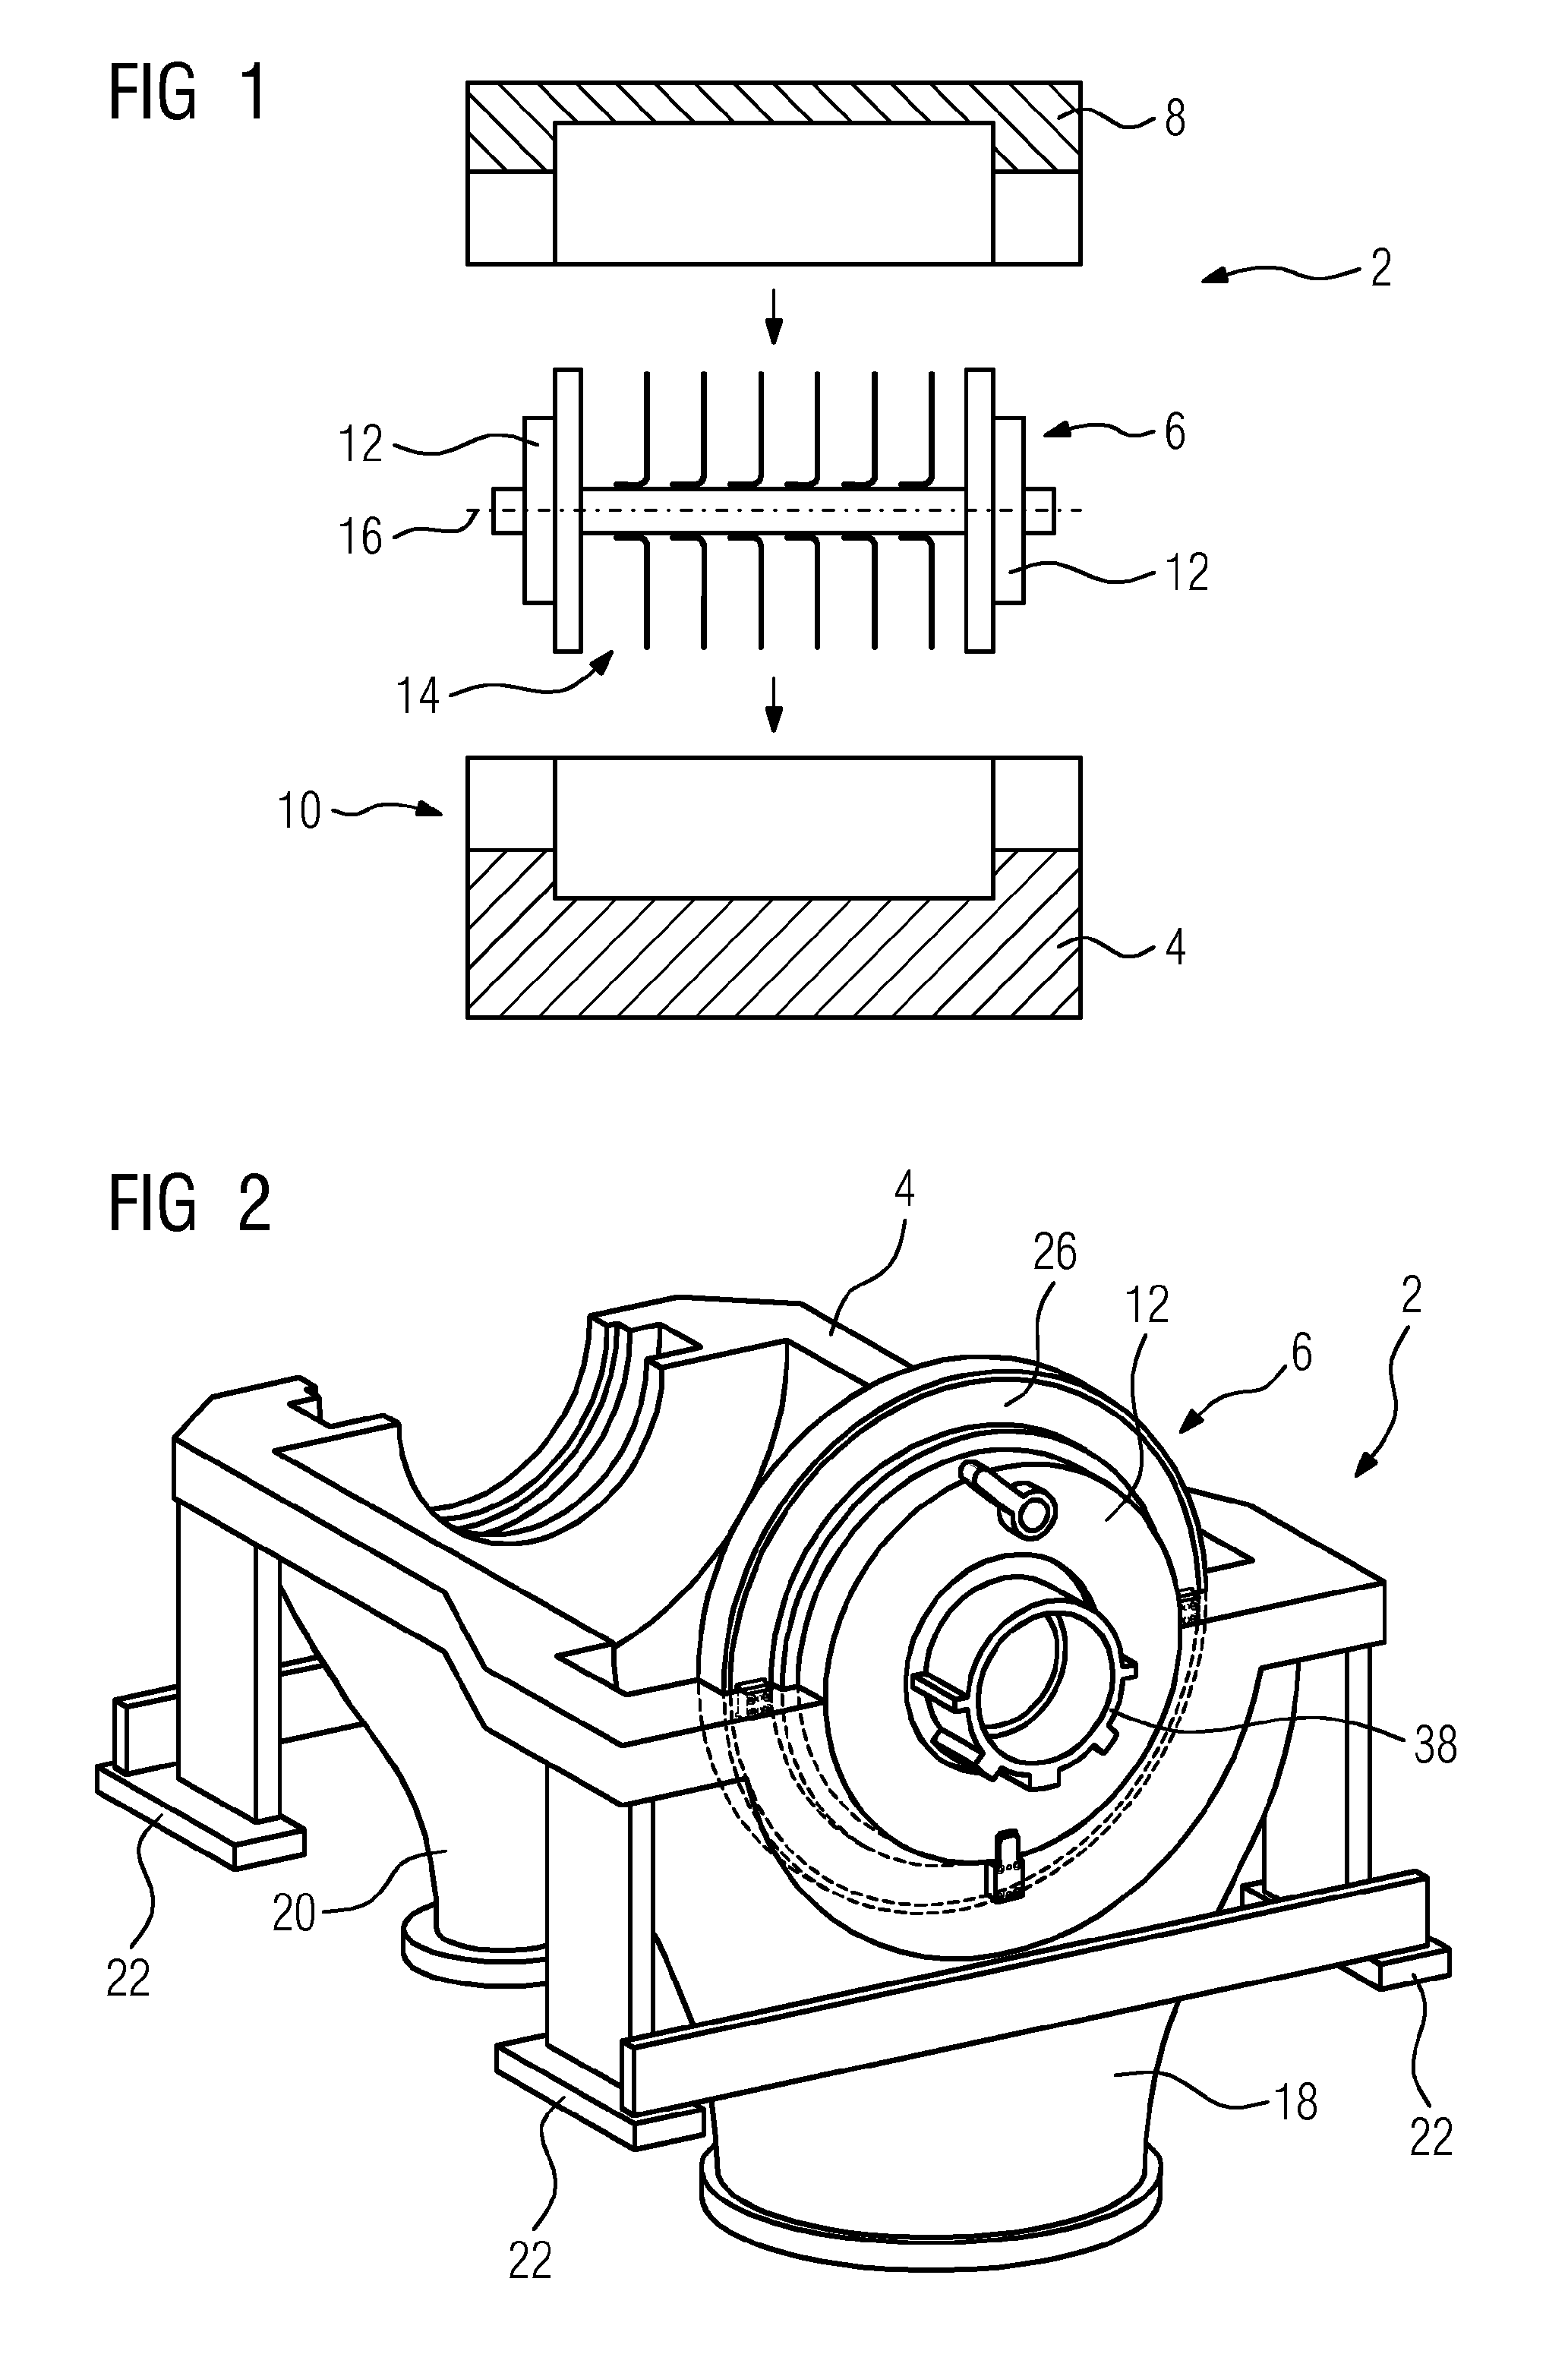 Turbomachine having a temperature-controlled cover